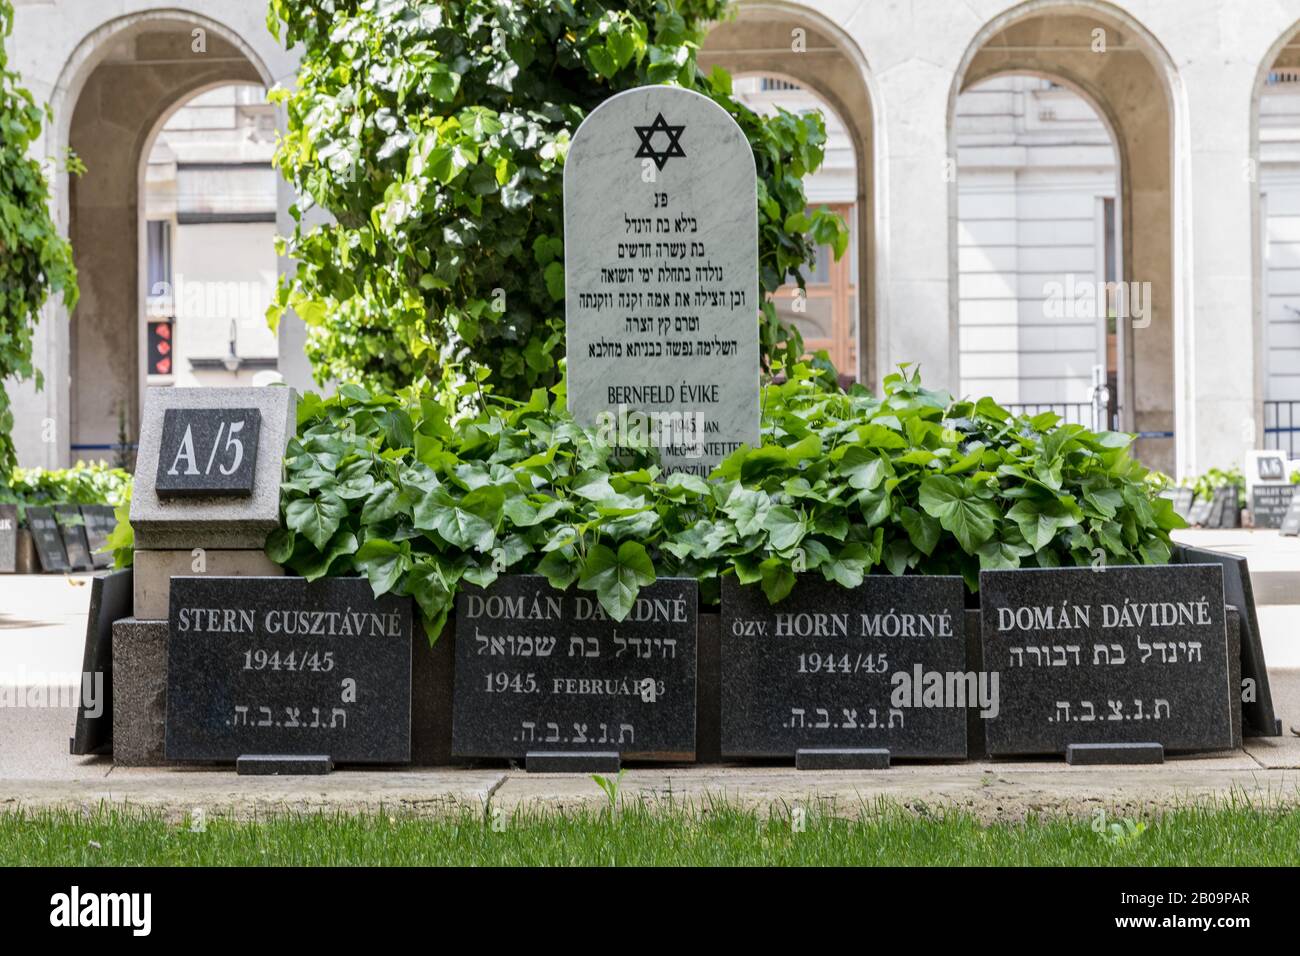 Budapest, Hungary - 25 April 2019: Dohány Street Synagogue historical Cemetery (also known as the Great Synagogue or Tabakgasse), Hungary Stock Photo